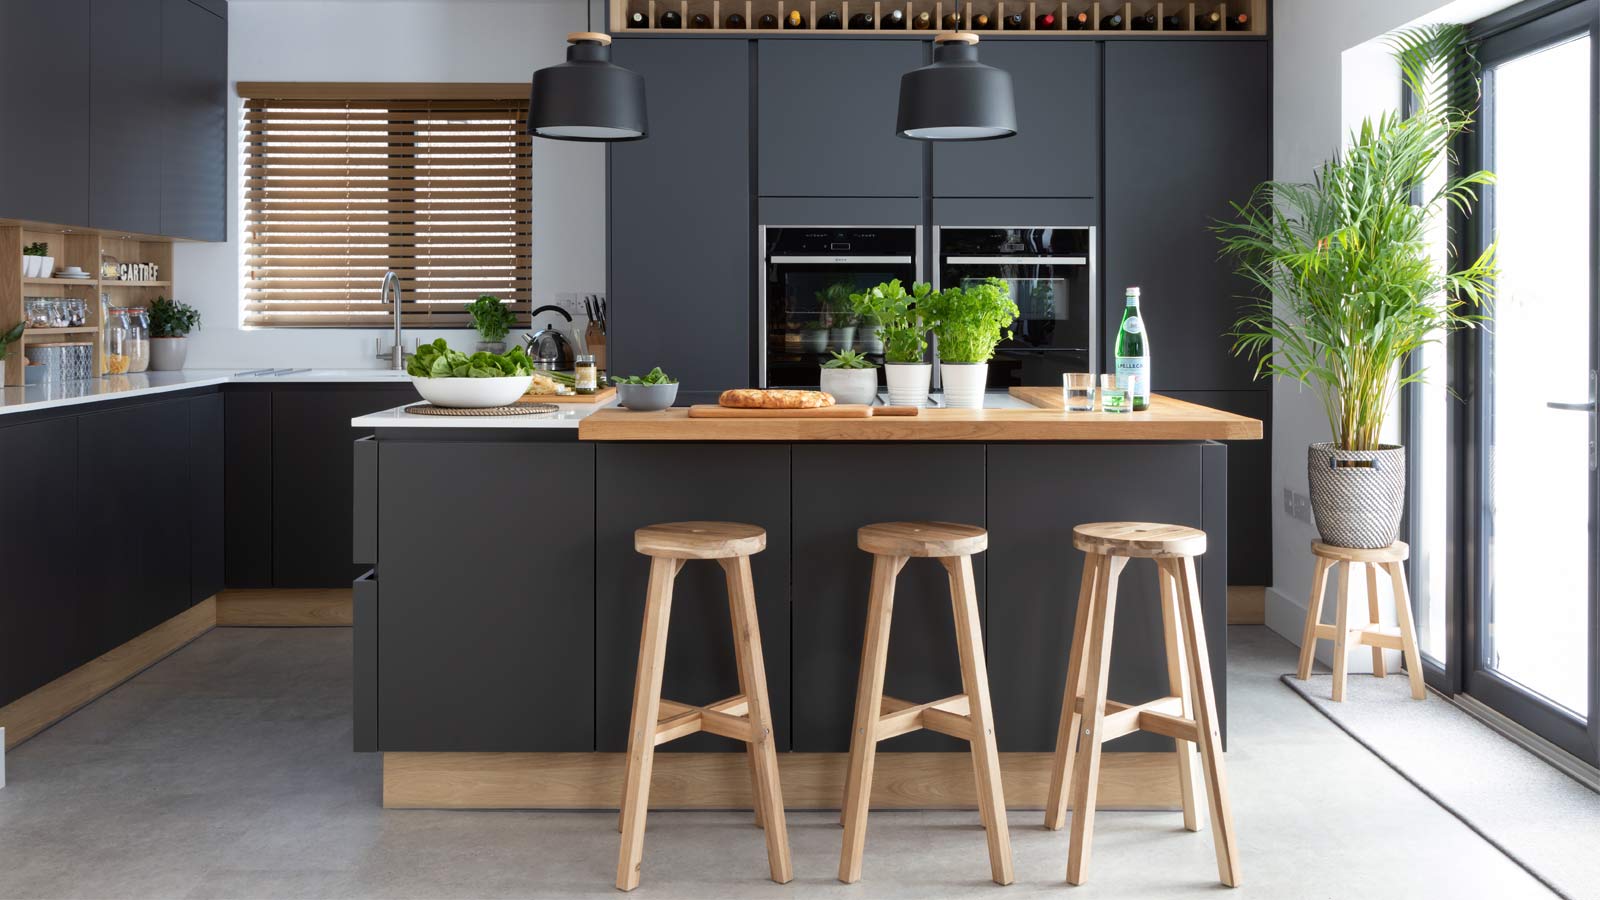 Biophilic interior design in a modern kitchen with wooden barstools